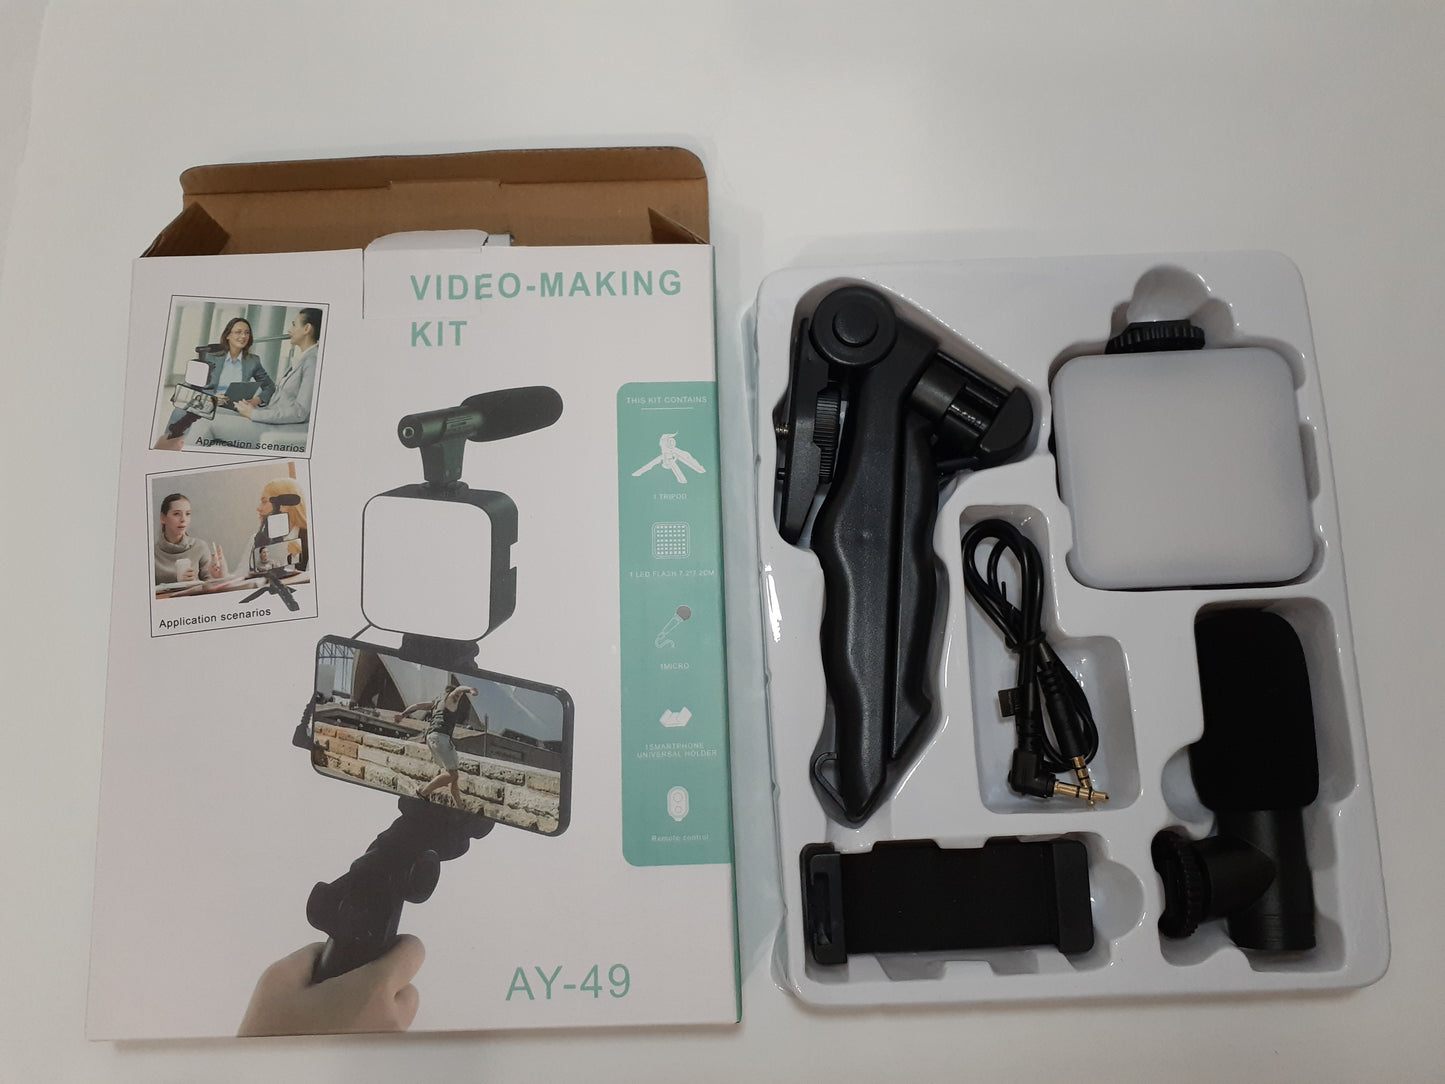 All-in-One Vlogging Kit, Wireless Remote, Microphone,  Table Tripod & LED Lights for complete Vlogging Experience, Content Creation, Podcasting, Broadcasting and more. Smartphone Vlog Video Kit with Table Tripod, Phone Holder,